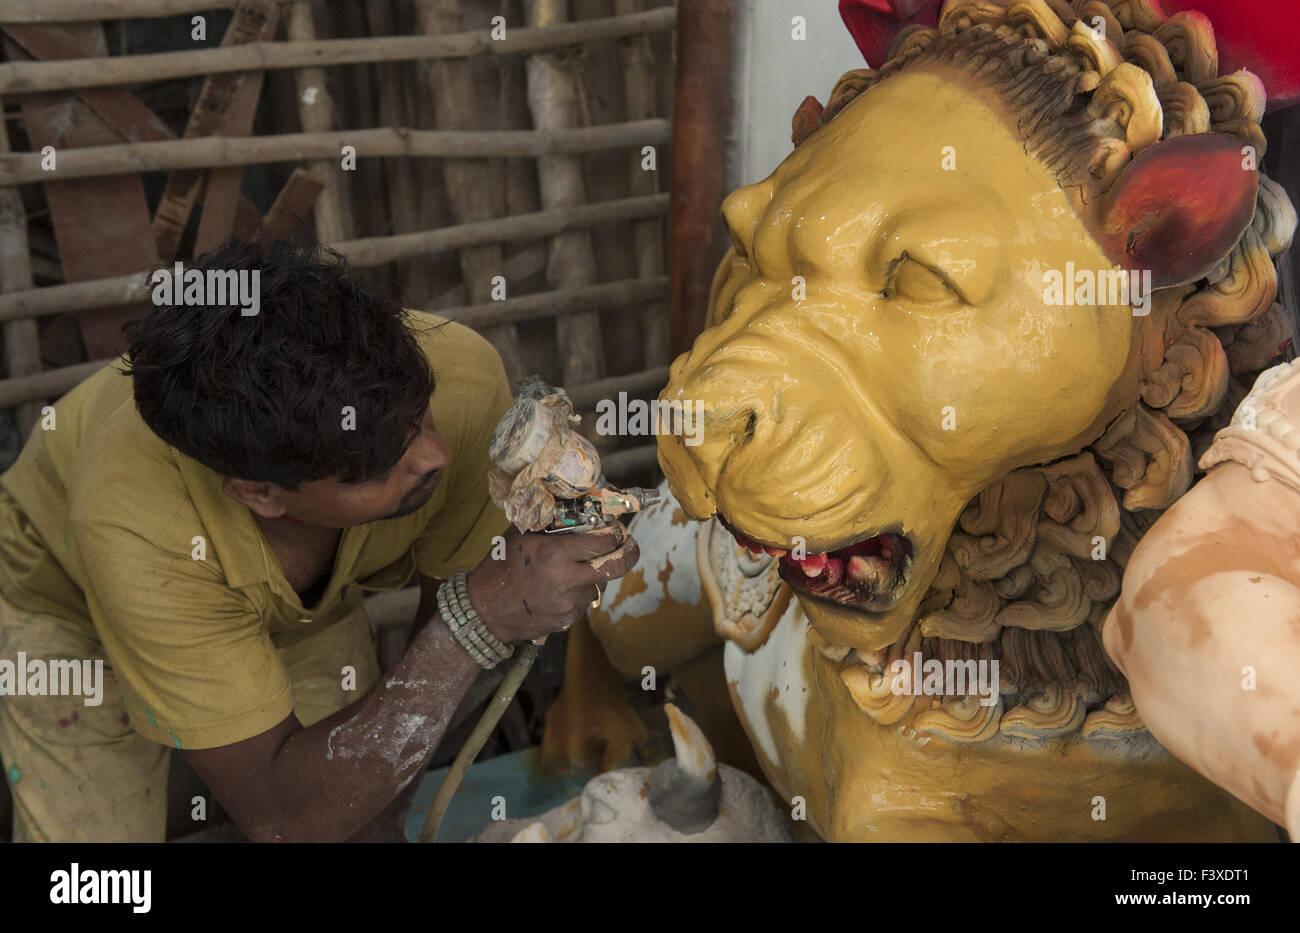 Kolkata. 13th Oct, 2015. An Indian artist paints a clay statue in preparation for the upcoming Durga Puju festival at Kumartuly in Kolkata, Oct. 13, 2015. Durga Puja, the largest Hindu festival, involves worship of Goddess Durga who symbolizes power and the triumph of good over evil in Hindu mythology. © Tumpa Mondal/Xinhua/Alamy Live News Stock Photo